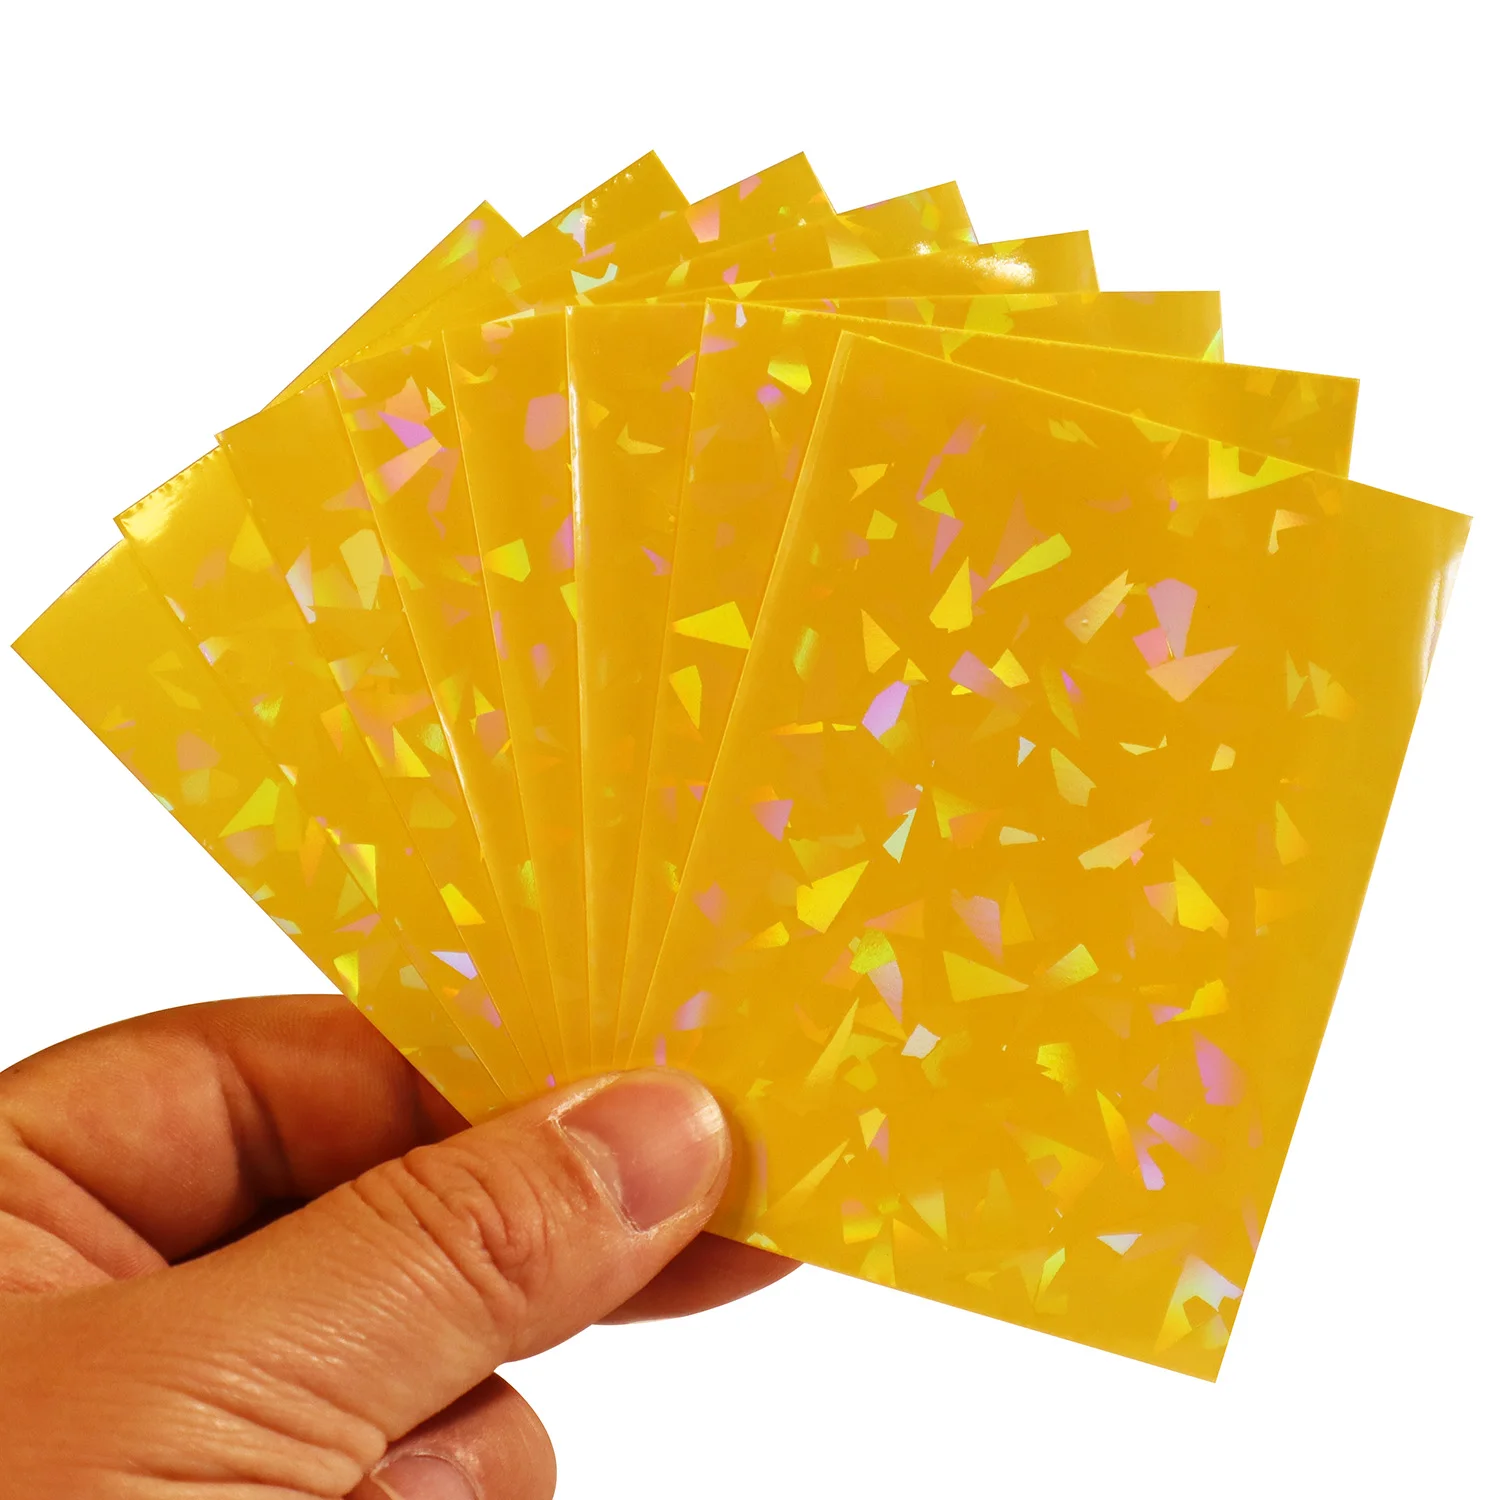 100 PCS/LOT Yellow Broken Gemstone Glass Laser High End Cover 66x91mm Film  Holographic Idol Photo Protector Card Sleeves